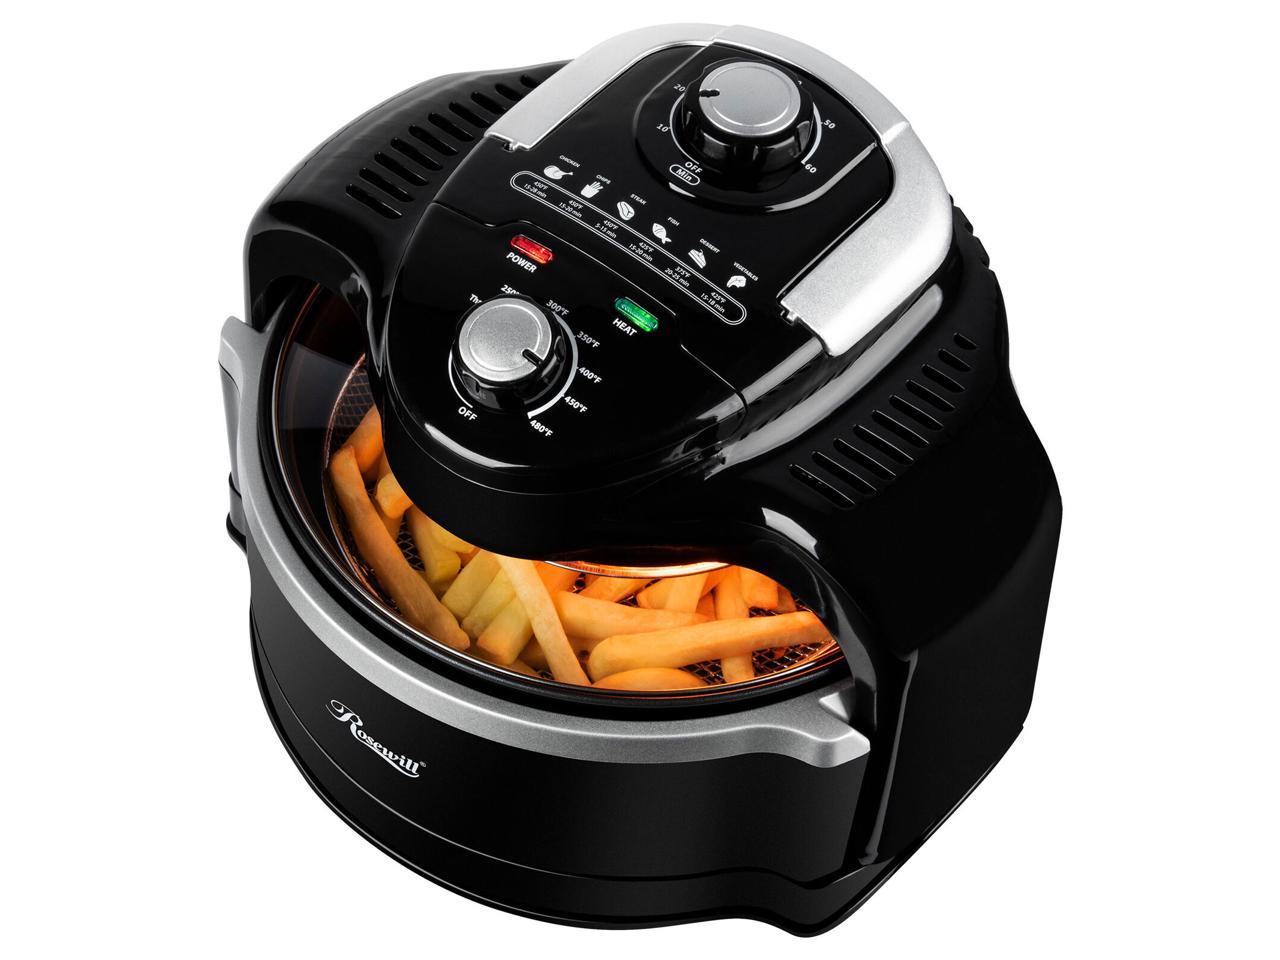 Rosewill 7.4-Qt Air Fryer Convection Oven Multicooker, Healthy Cooking, Oil-Less, 1000W, 250 to 480 Temperature Range, Infrar...